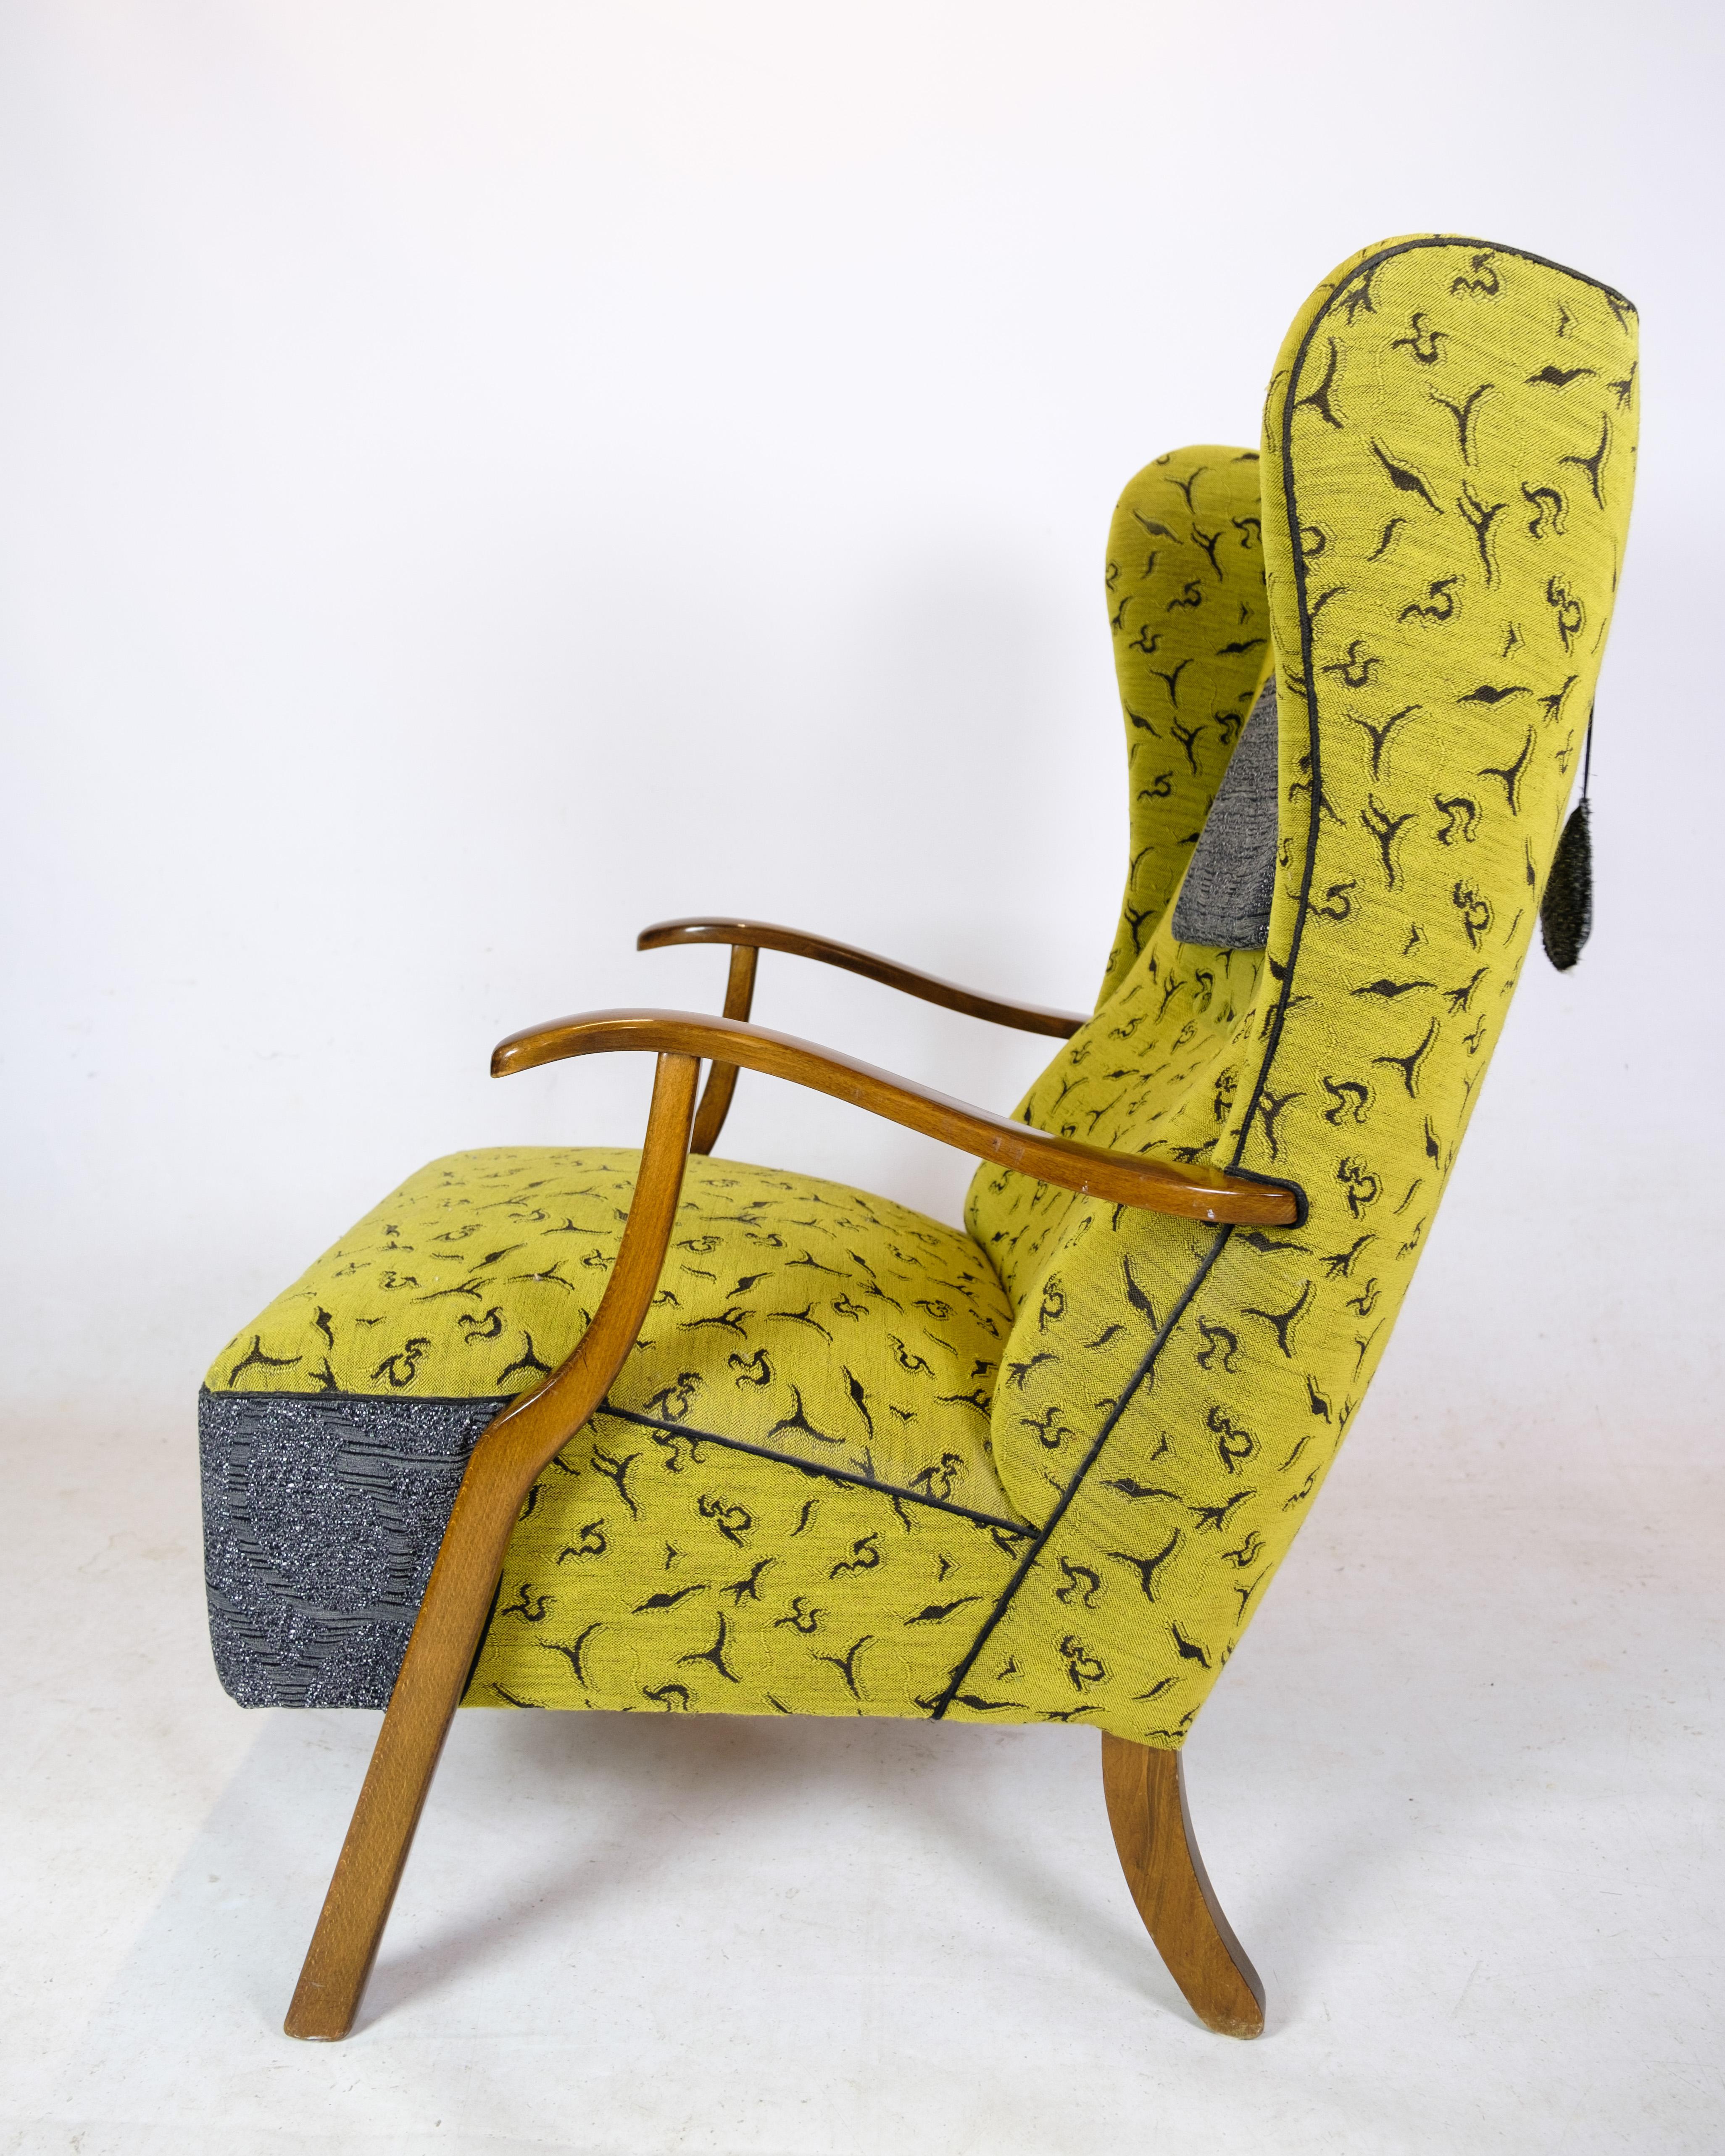 Armchair In Polished Nutwood By Danish Carpenter in Colorful fabric from 1940's For Sale 2